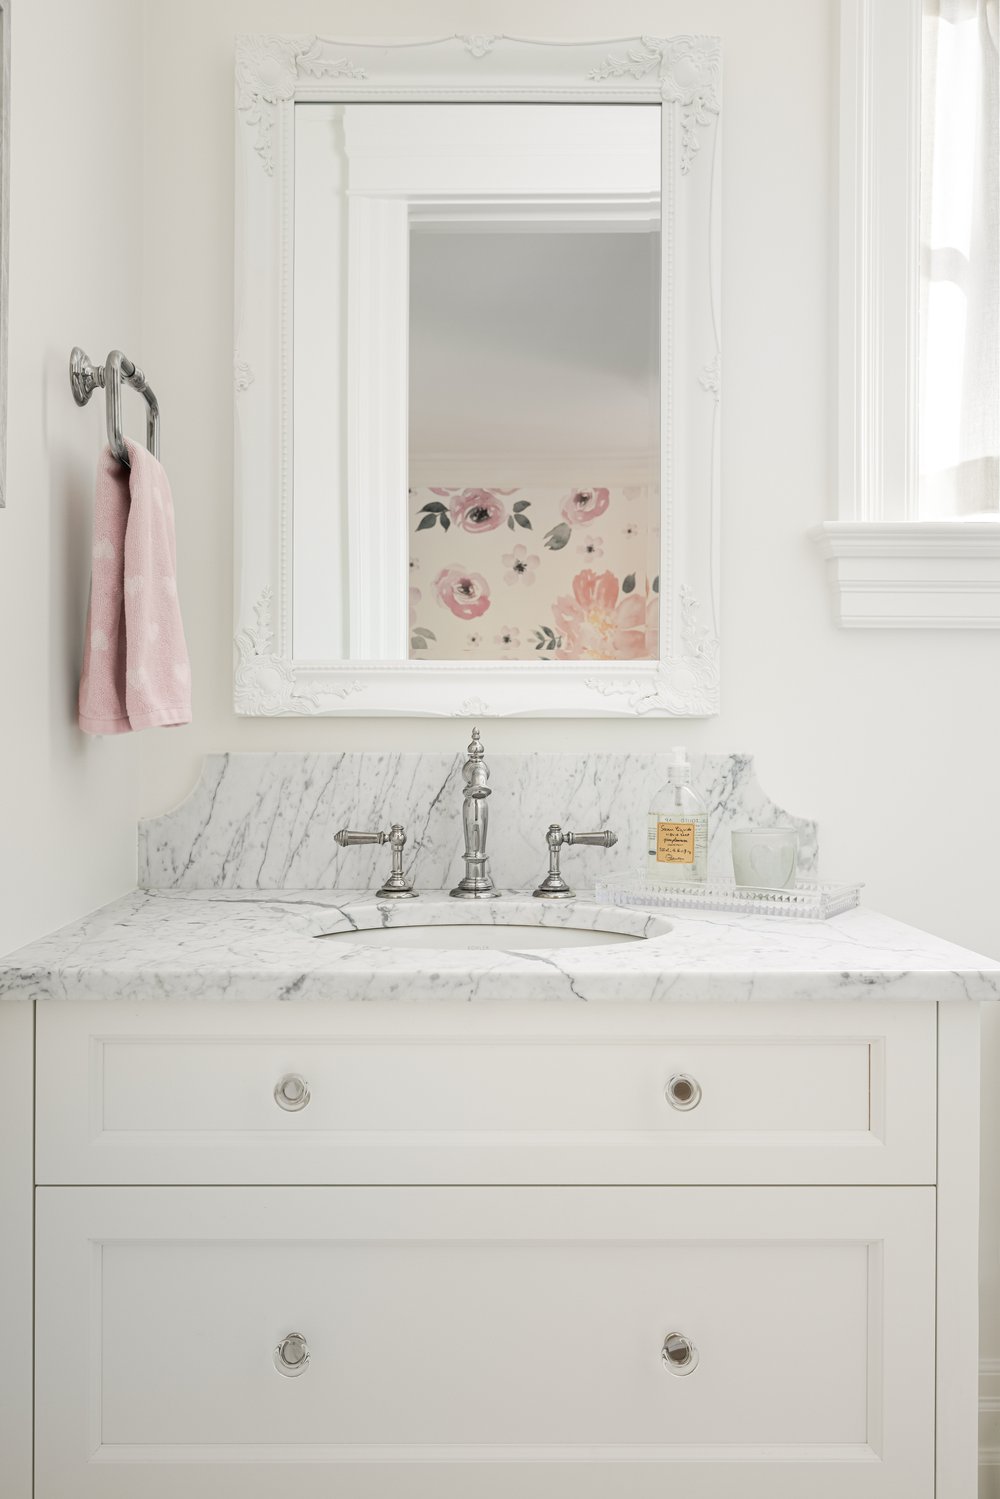 Classic traditional white bathroom design with marble and luxurious design by Jenny Martin. #classicstyle #whitebathroomdesign